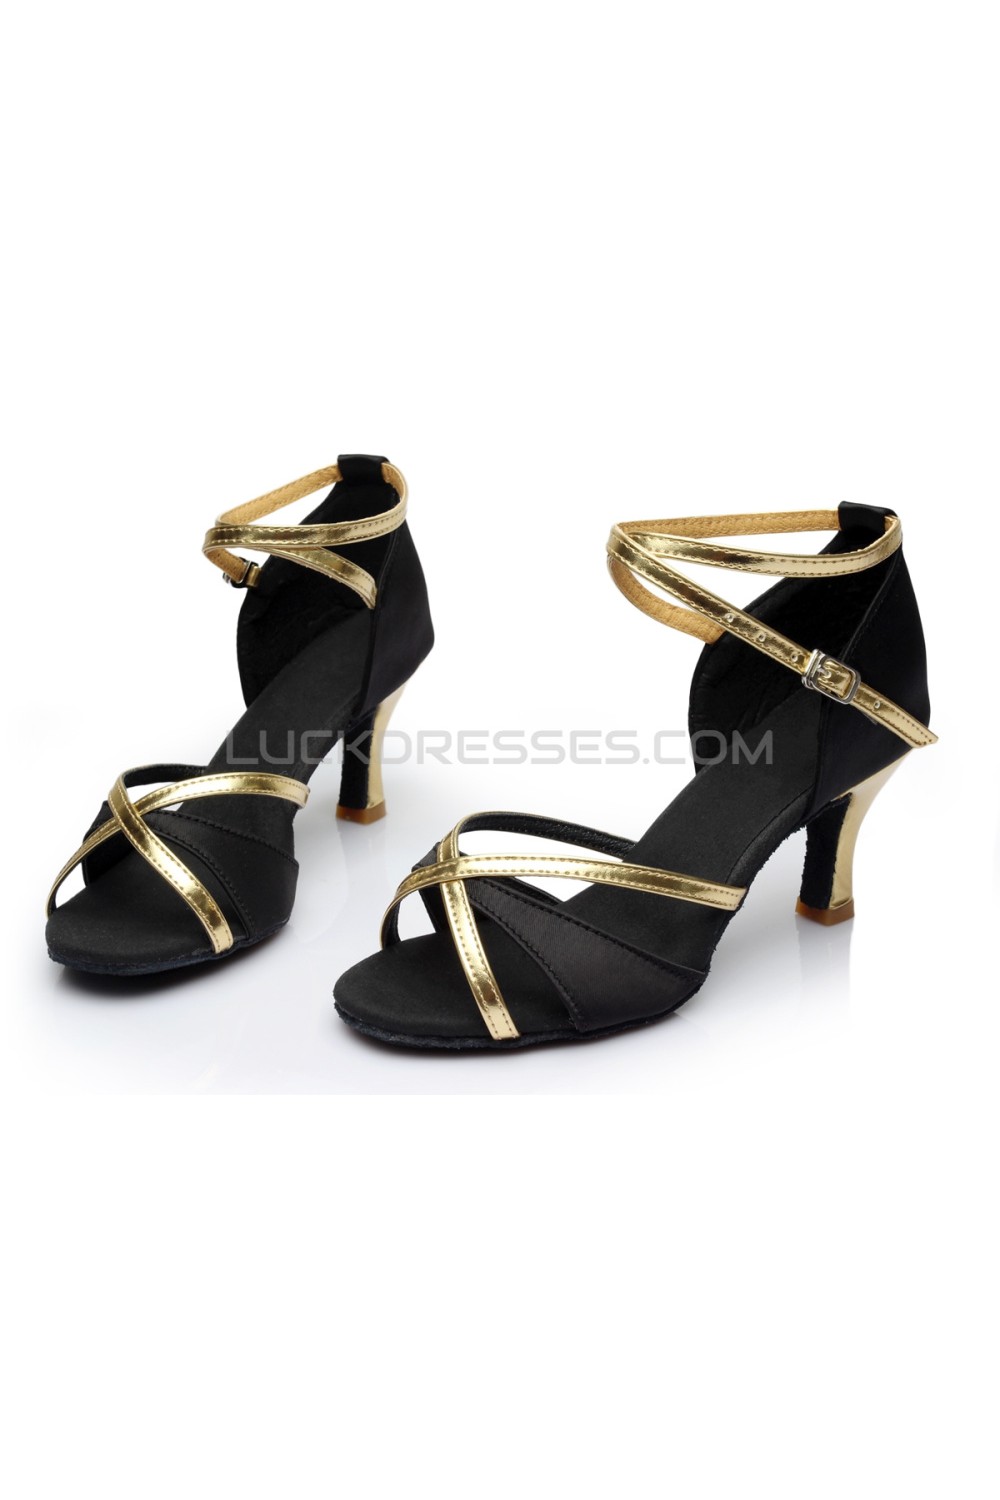 Buy > black and gold dress shoes women's > in stock